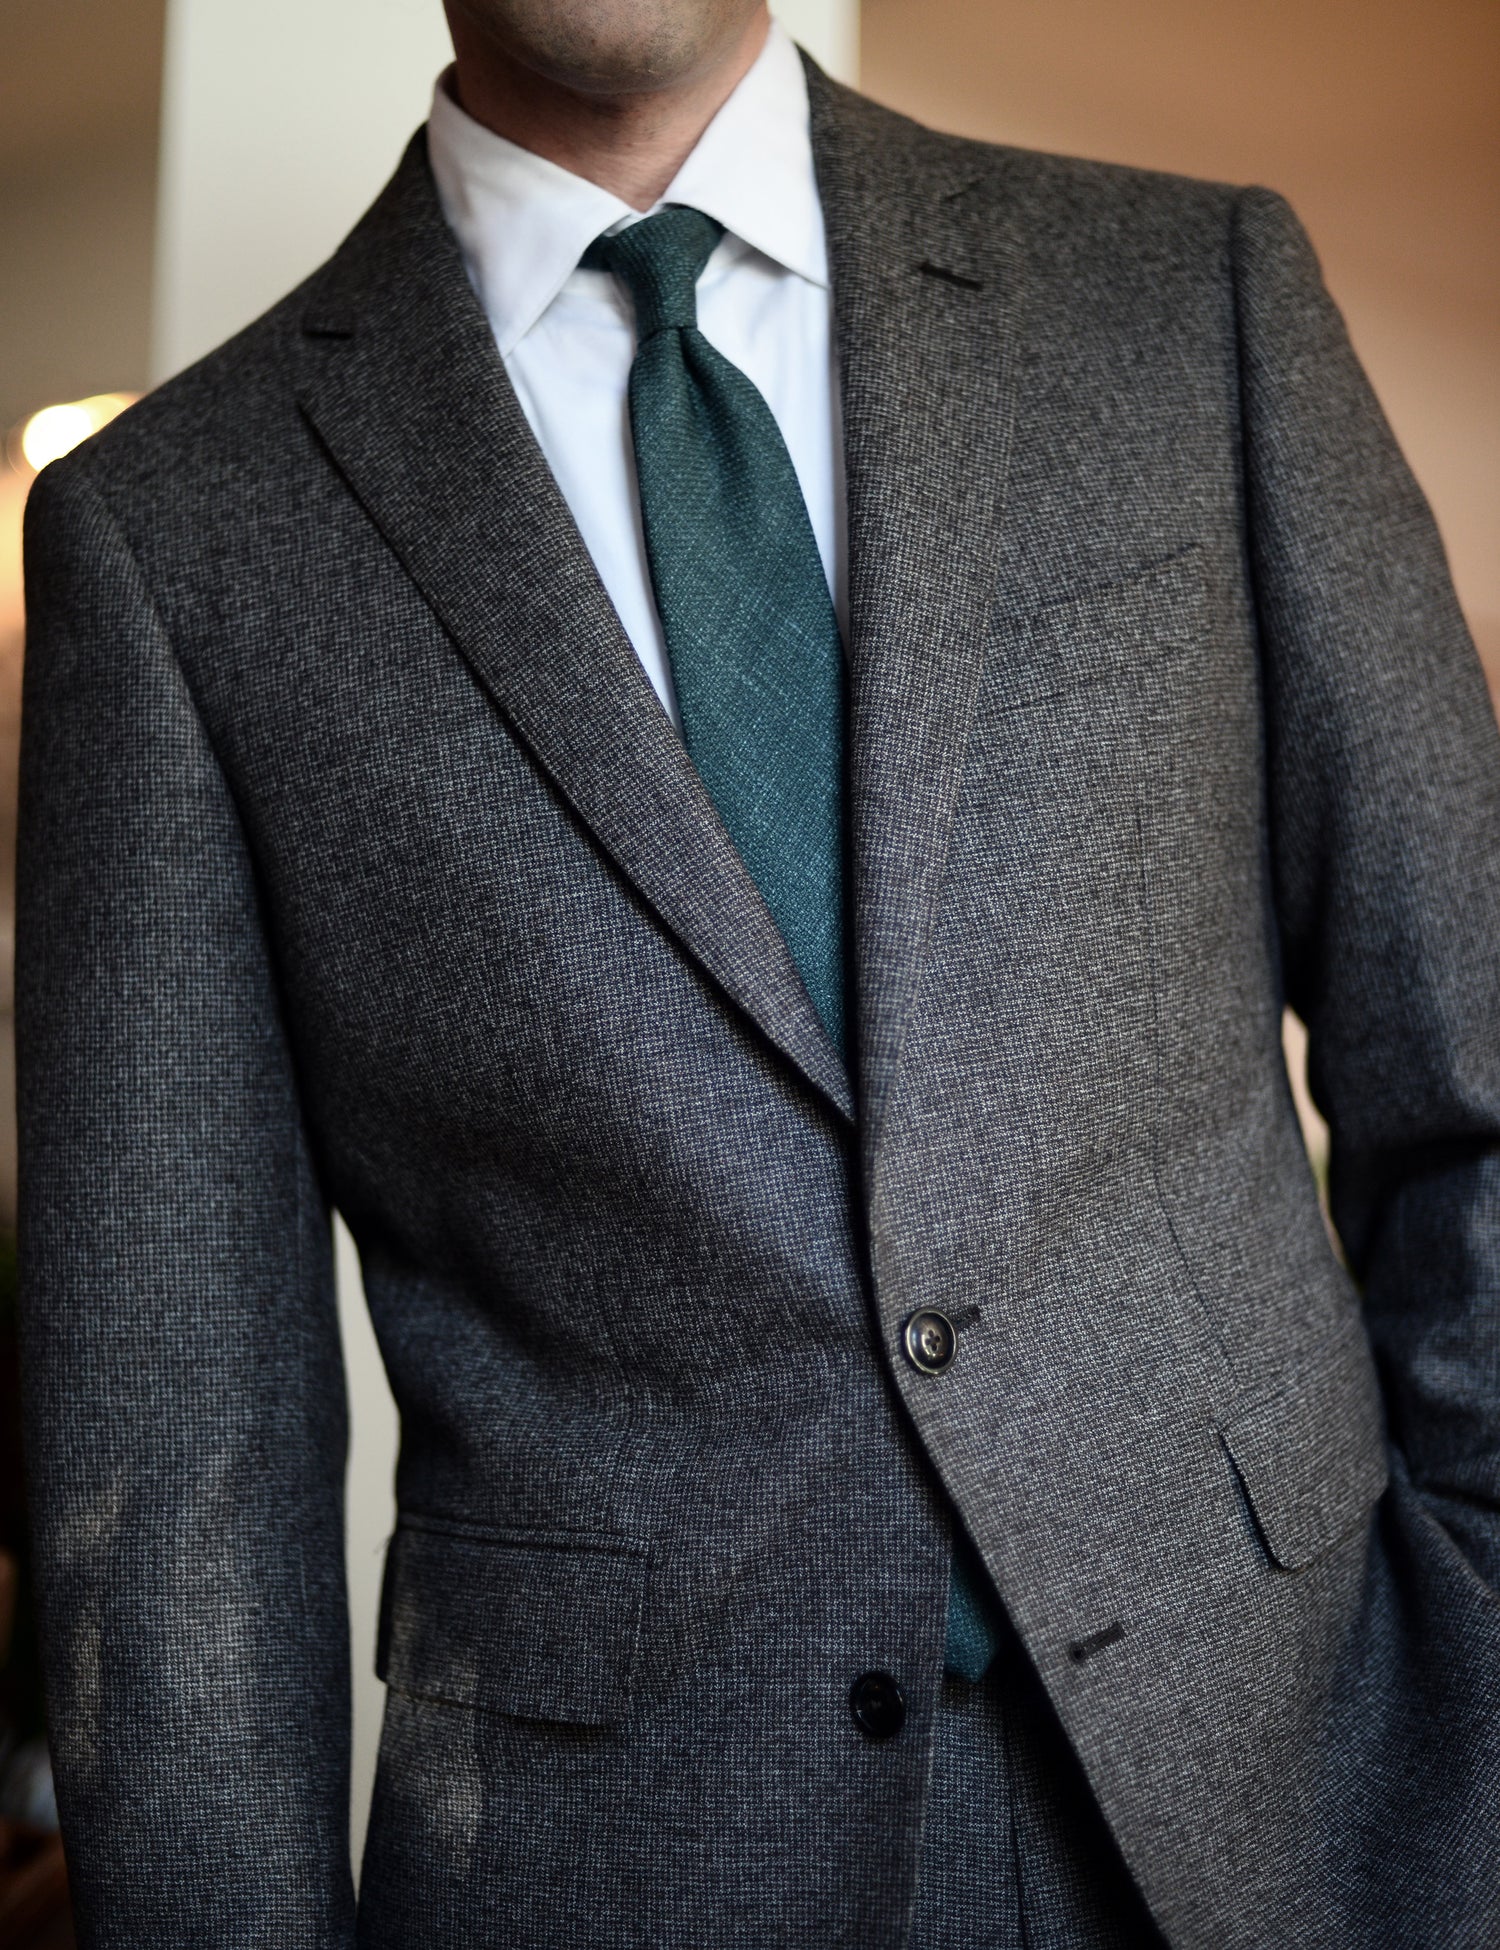 Silk, Wool, and Linen Hopsack Tie - Emerald on body. Model is wearing a suit jacket and white dress shirt. 